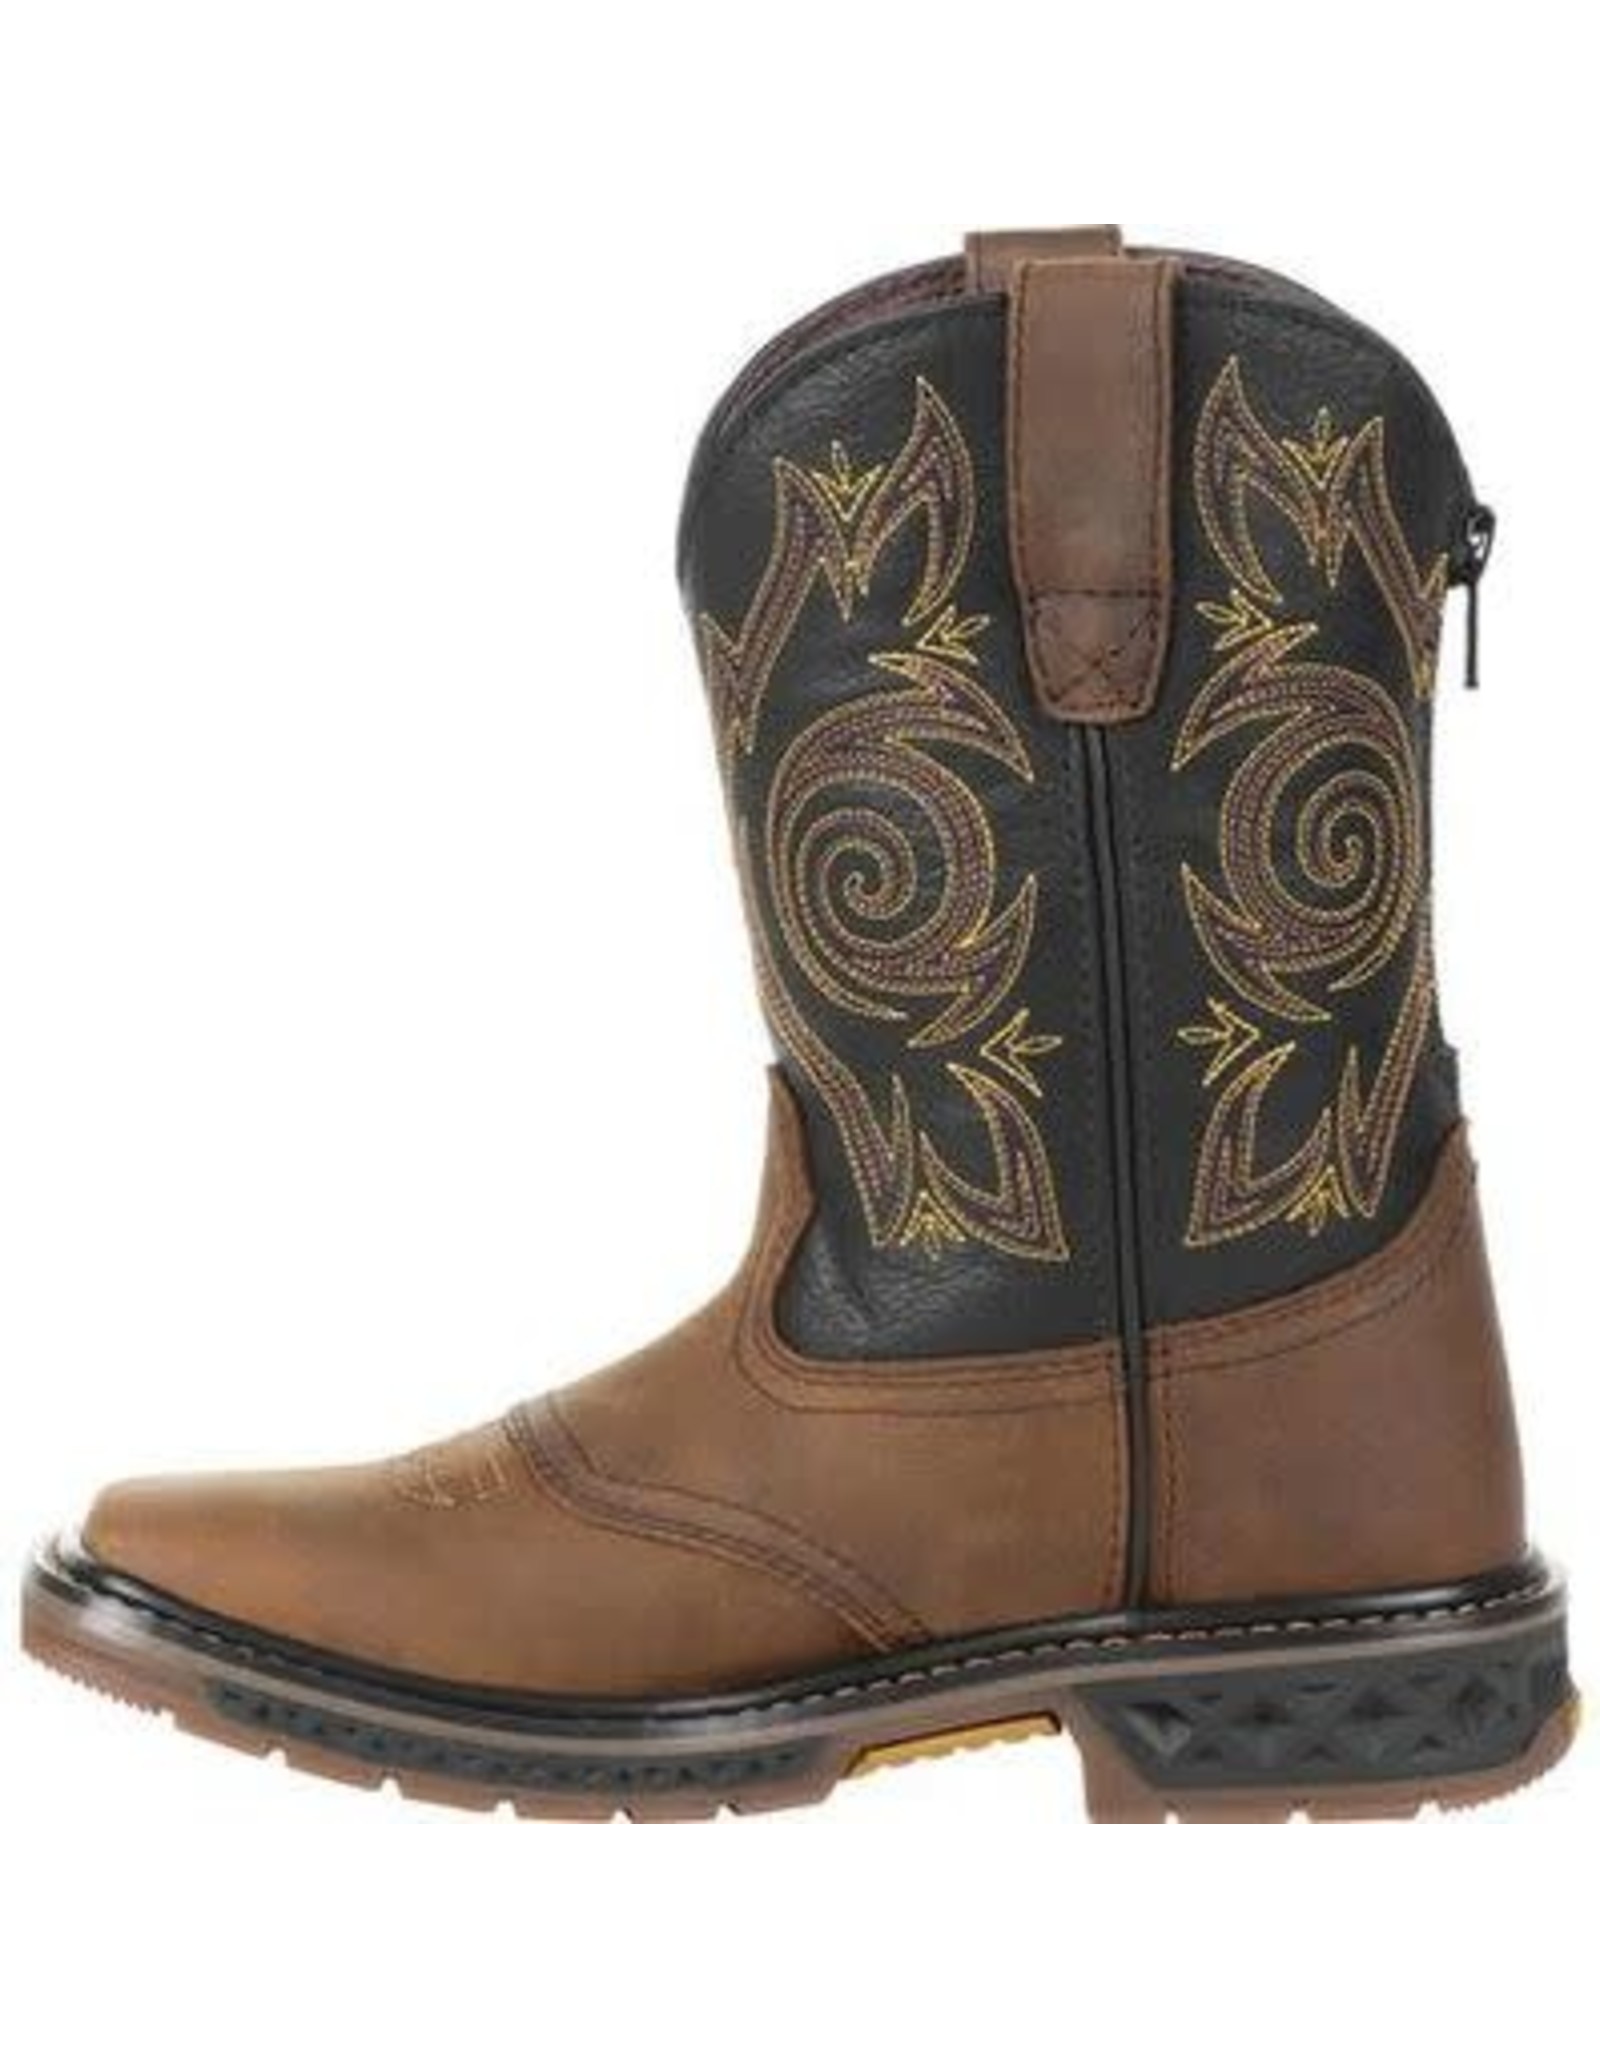 Georgia Carbotech GB00343 Kid's Boots Sz. 7y